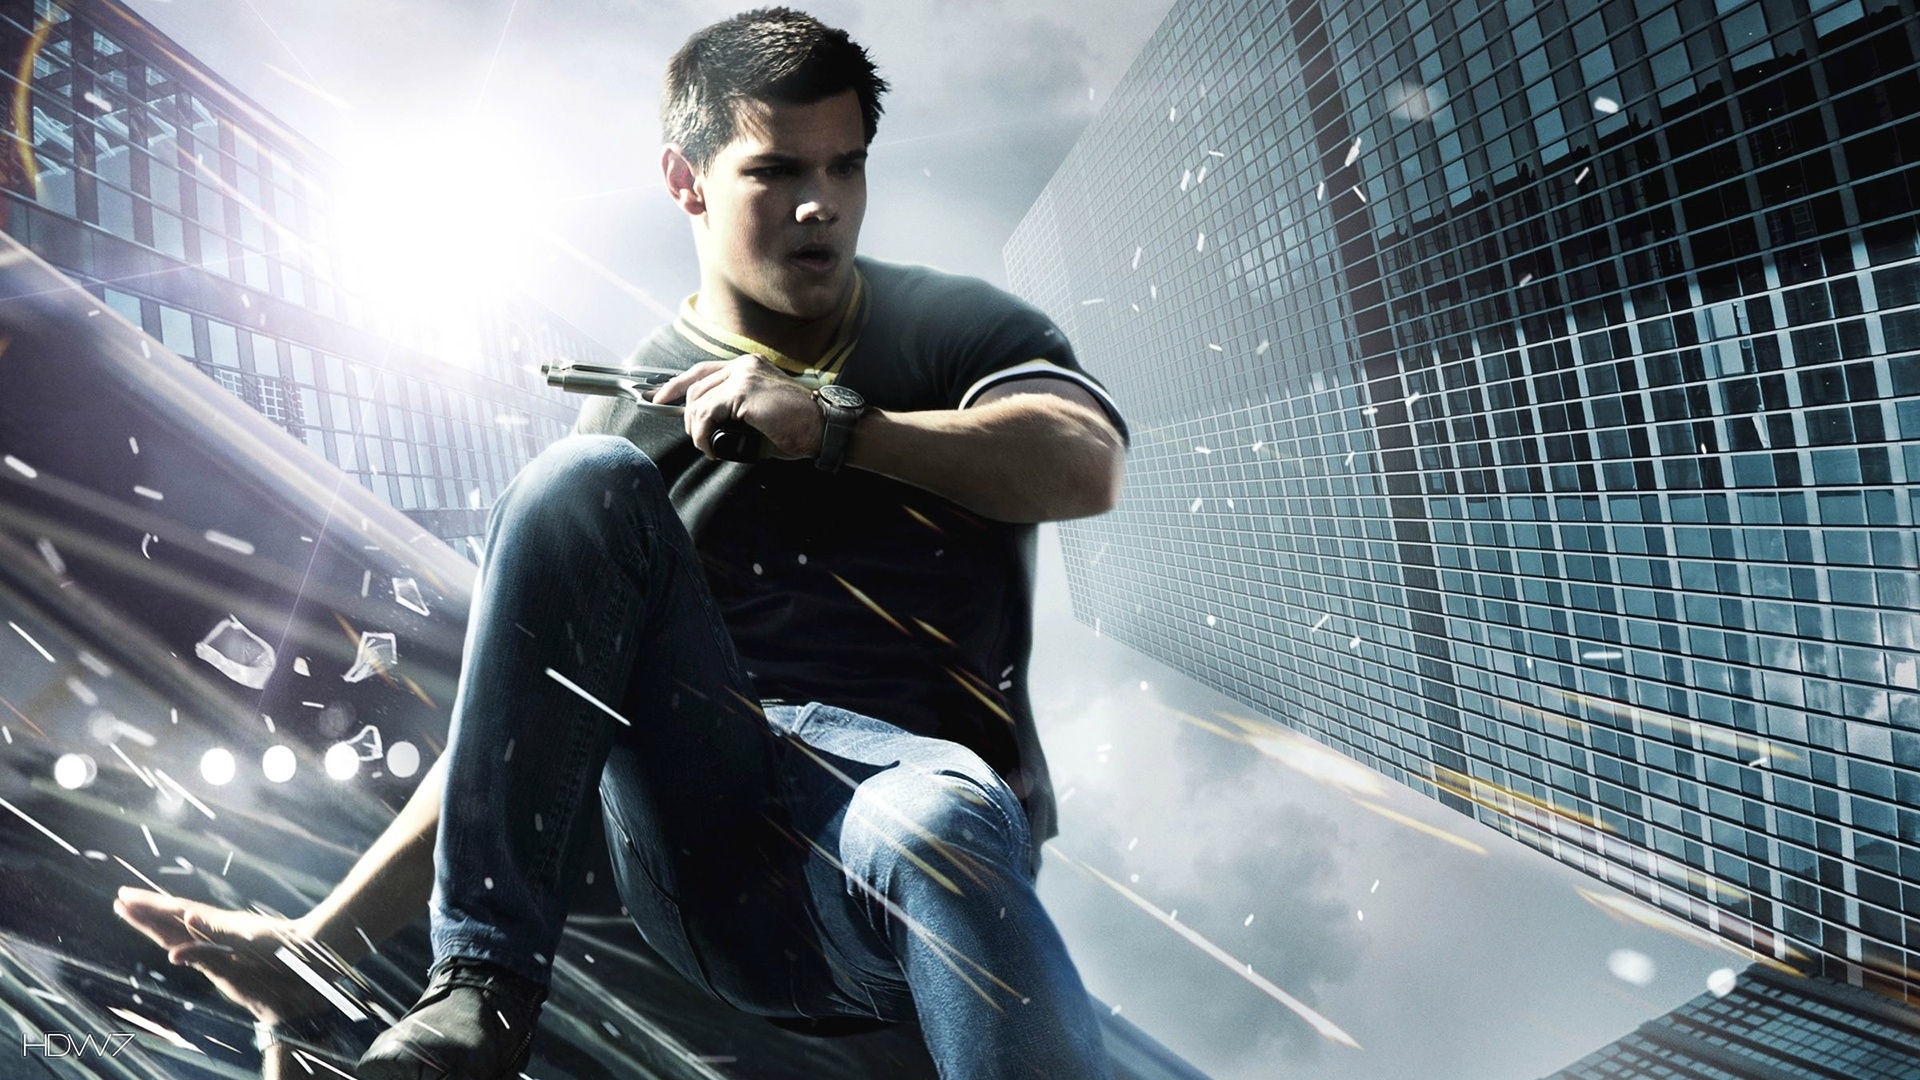 1920x1080 movie abduction taylor lautner hd wall